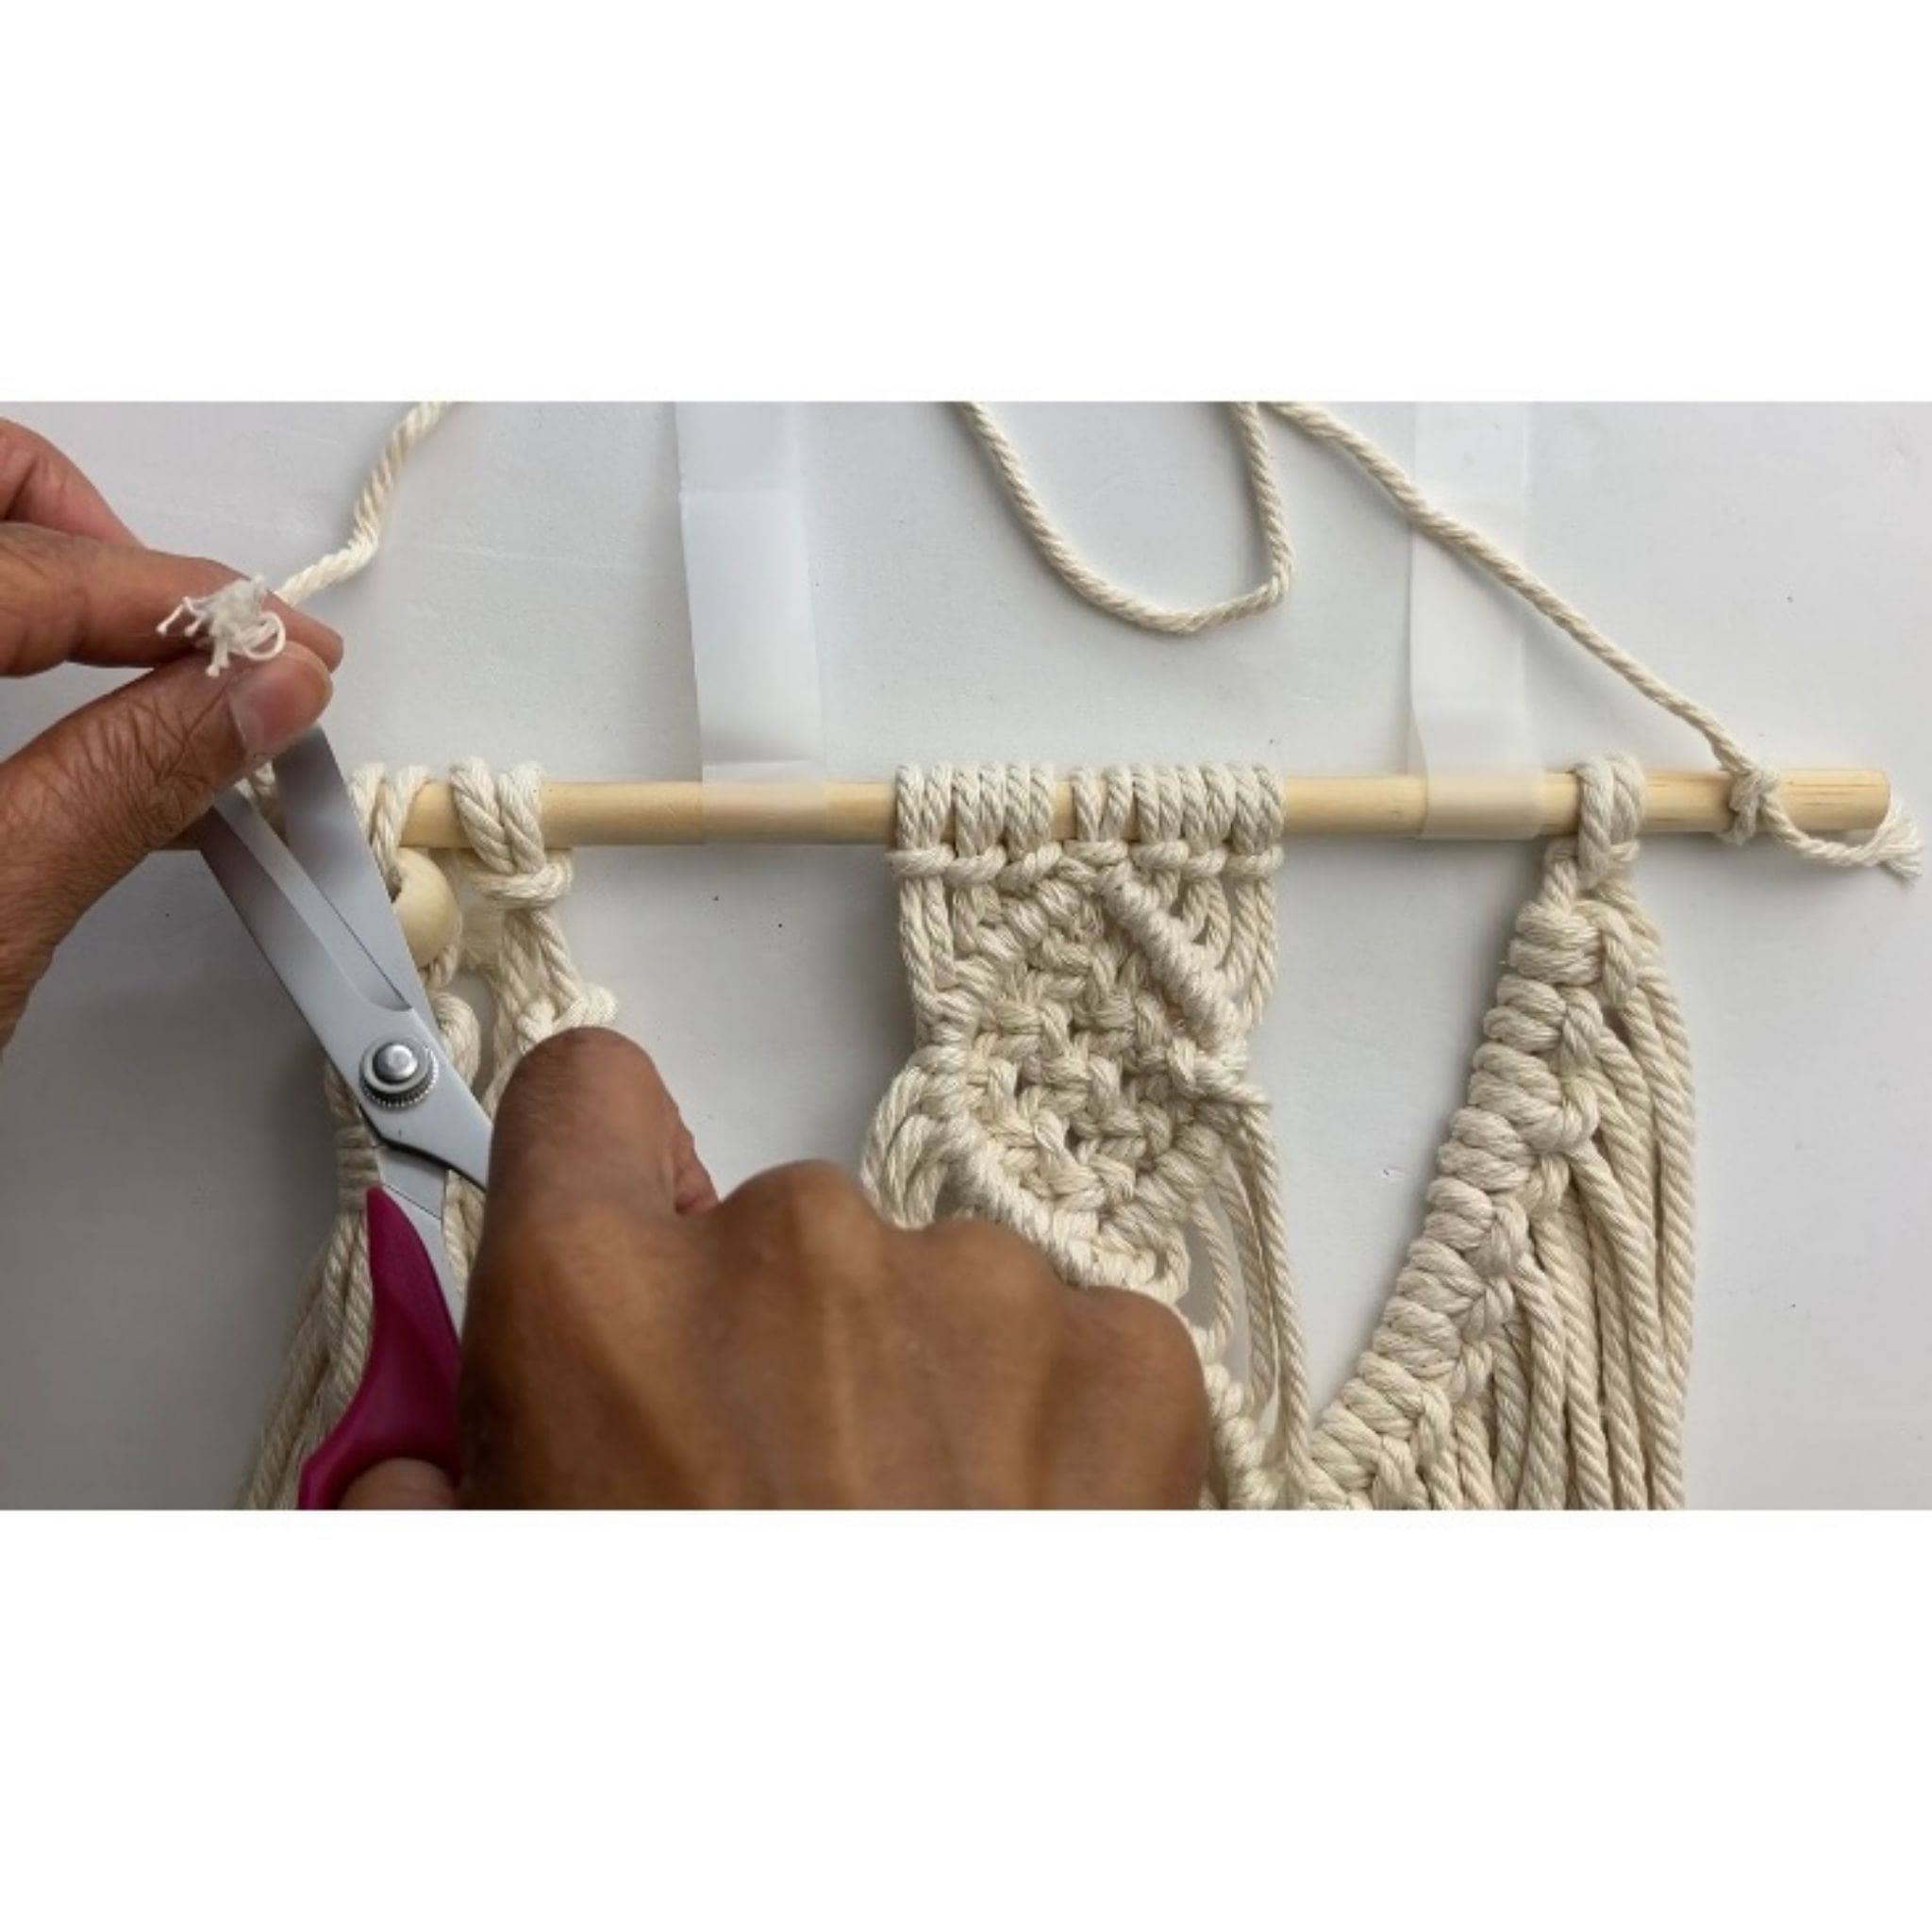 DIY Beginners Macrame Kit with all supplies needed and